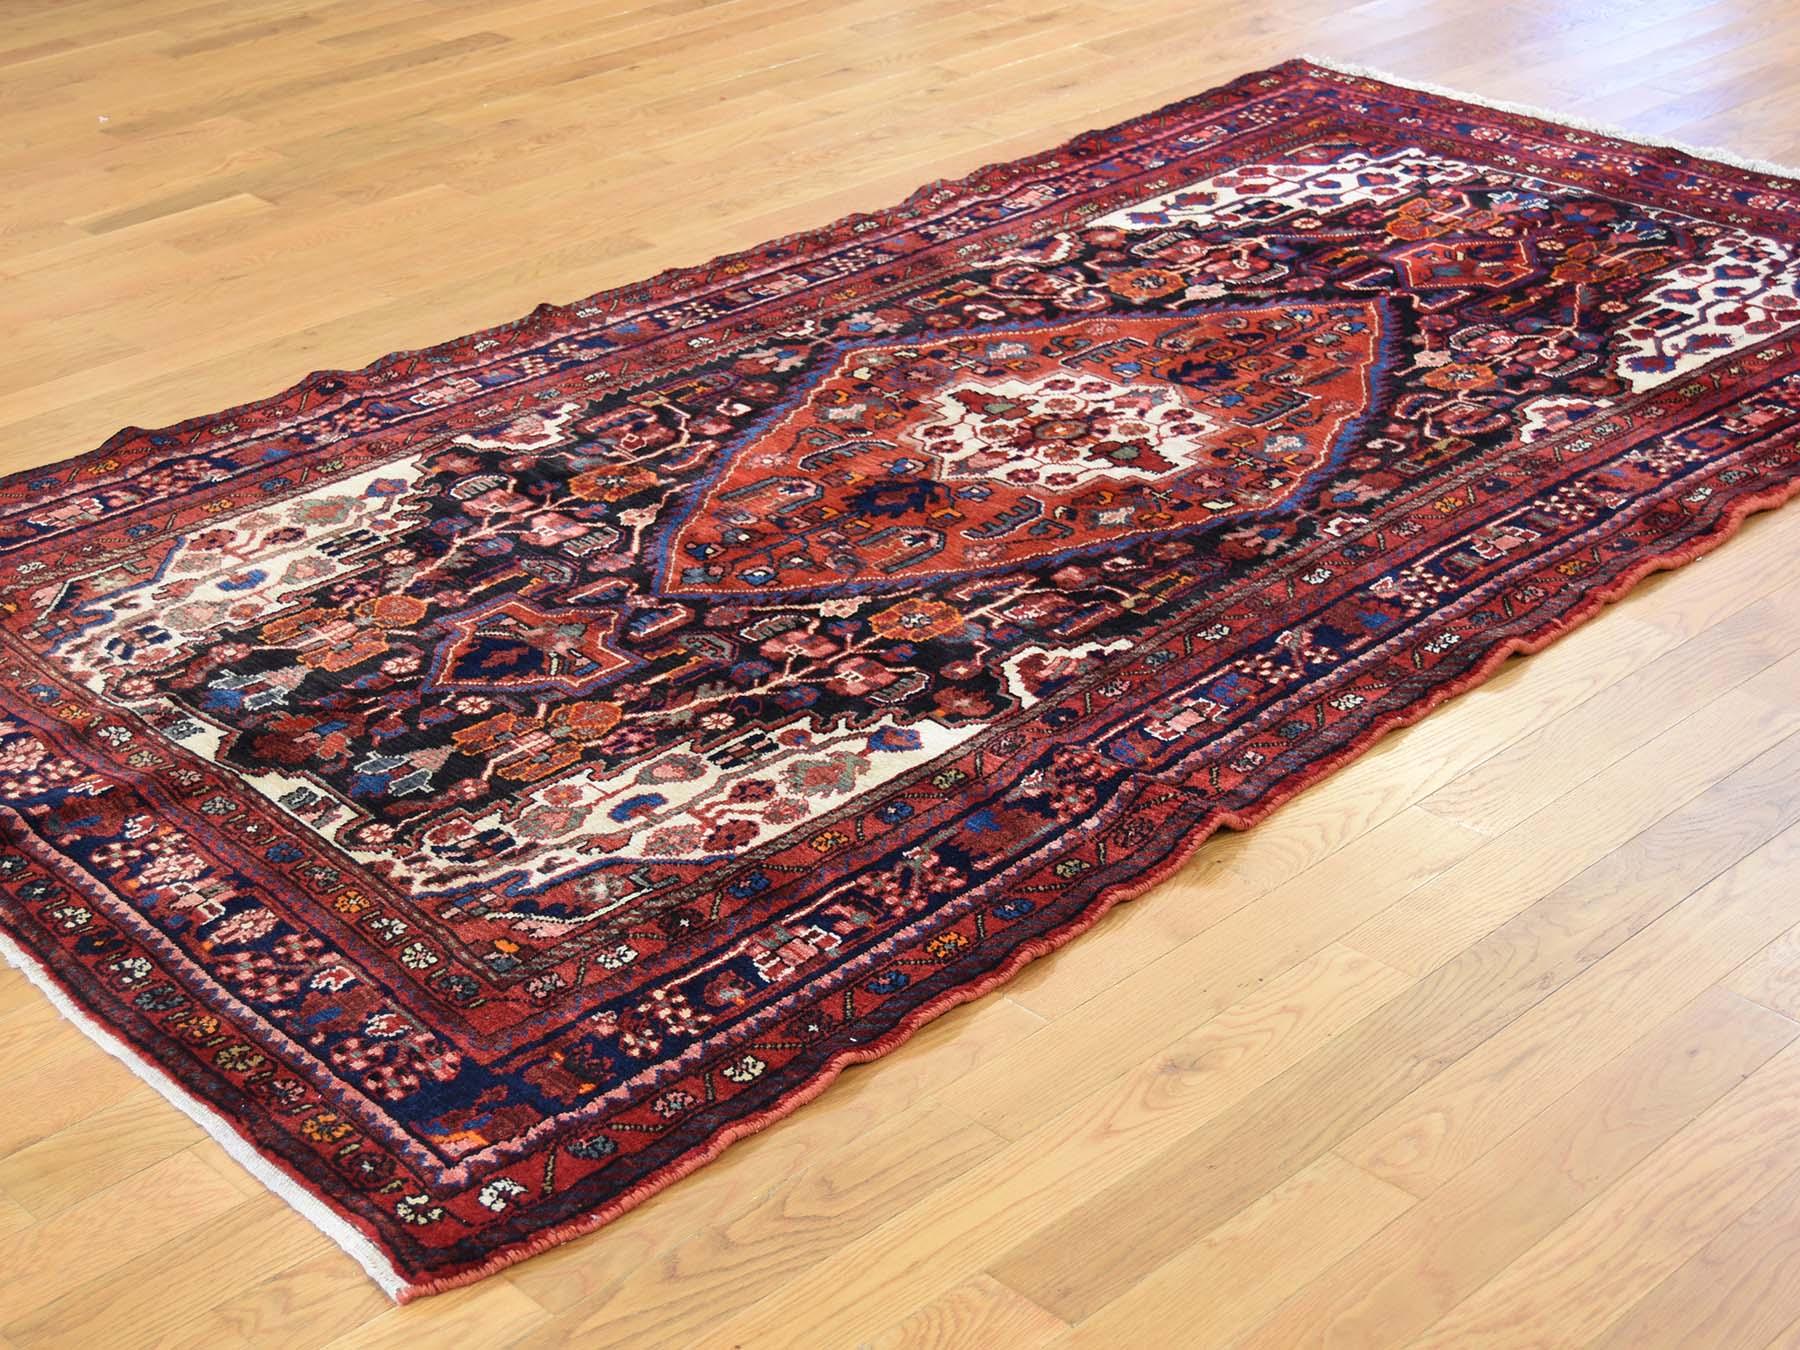 Medieval Hand Knotted Semi Antique Persian Nahavand Wide Runner Rug